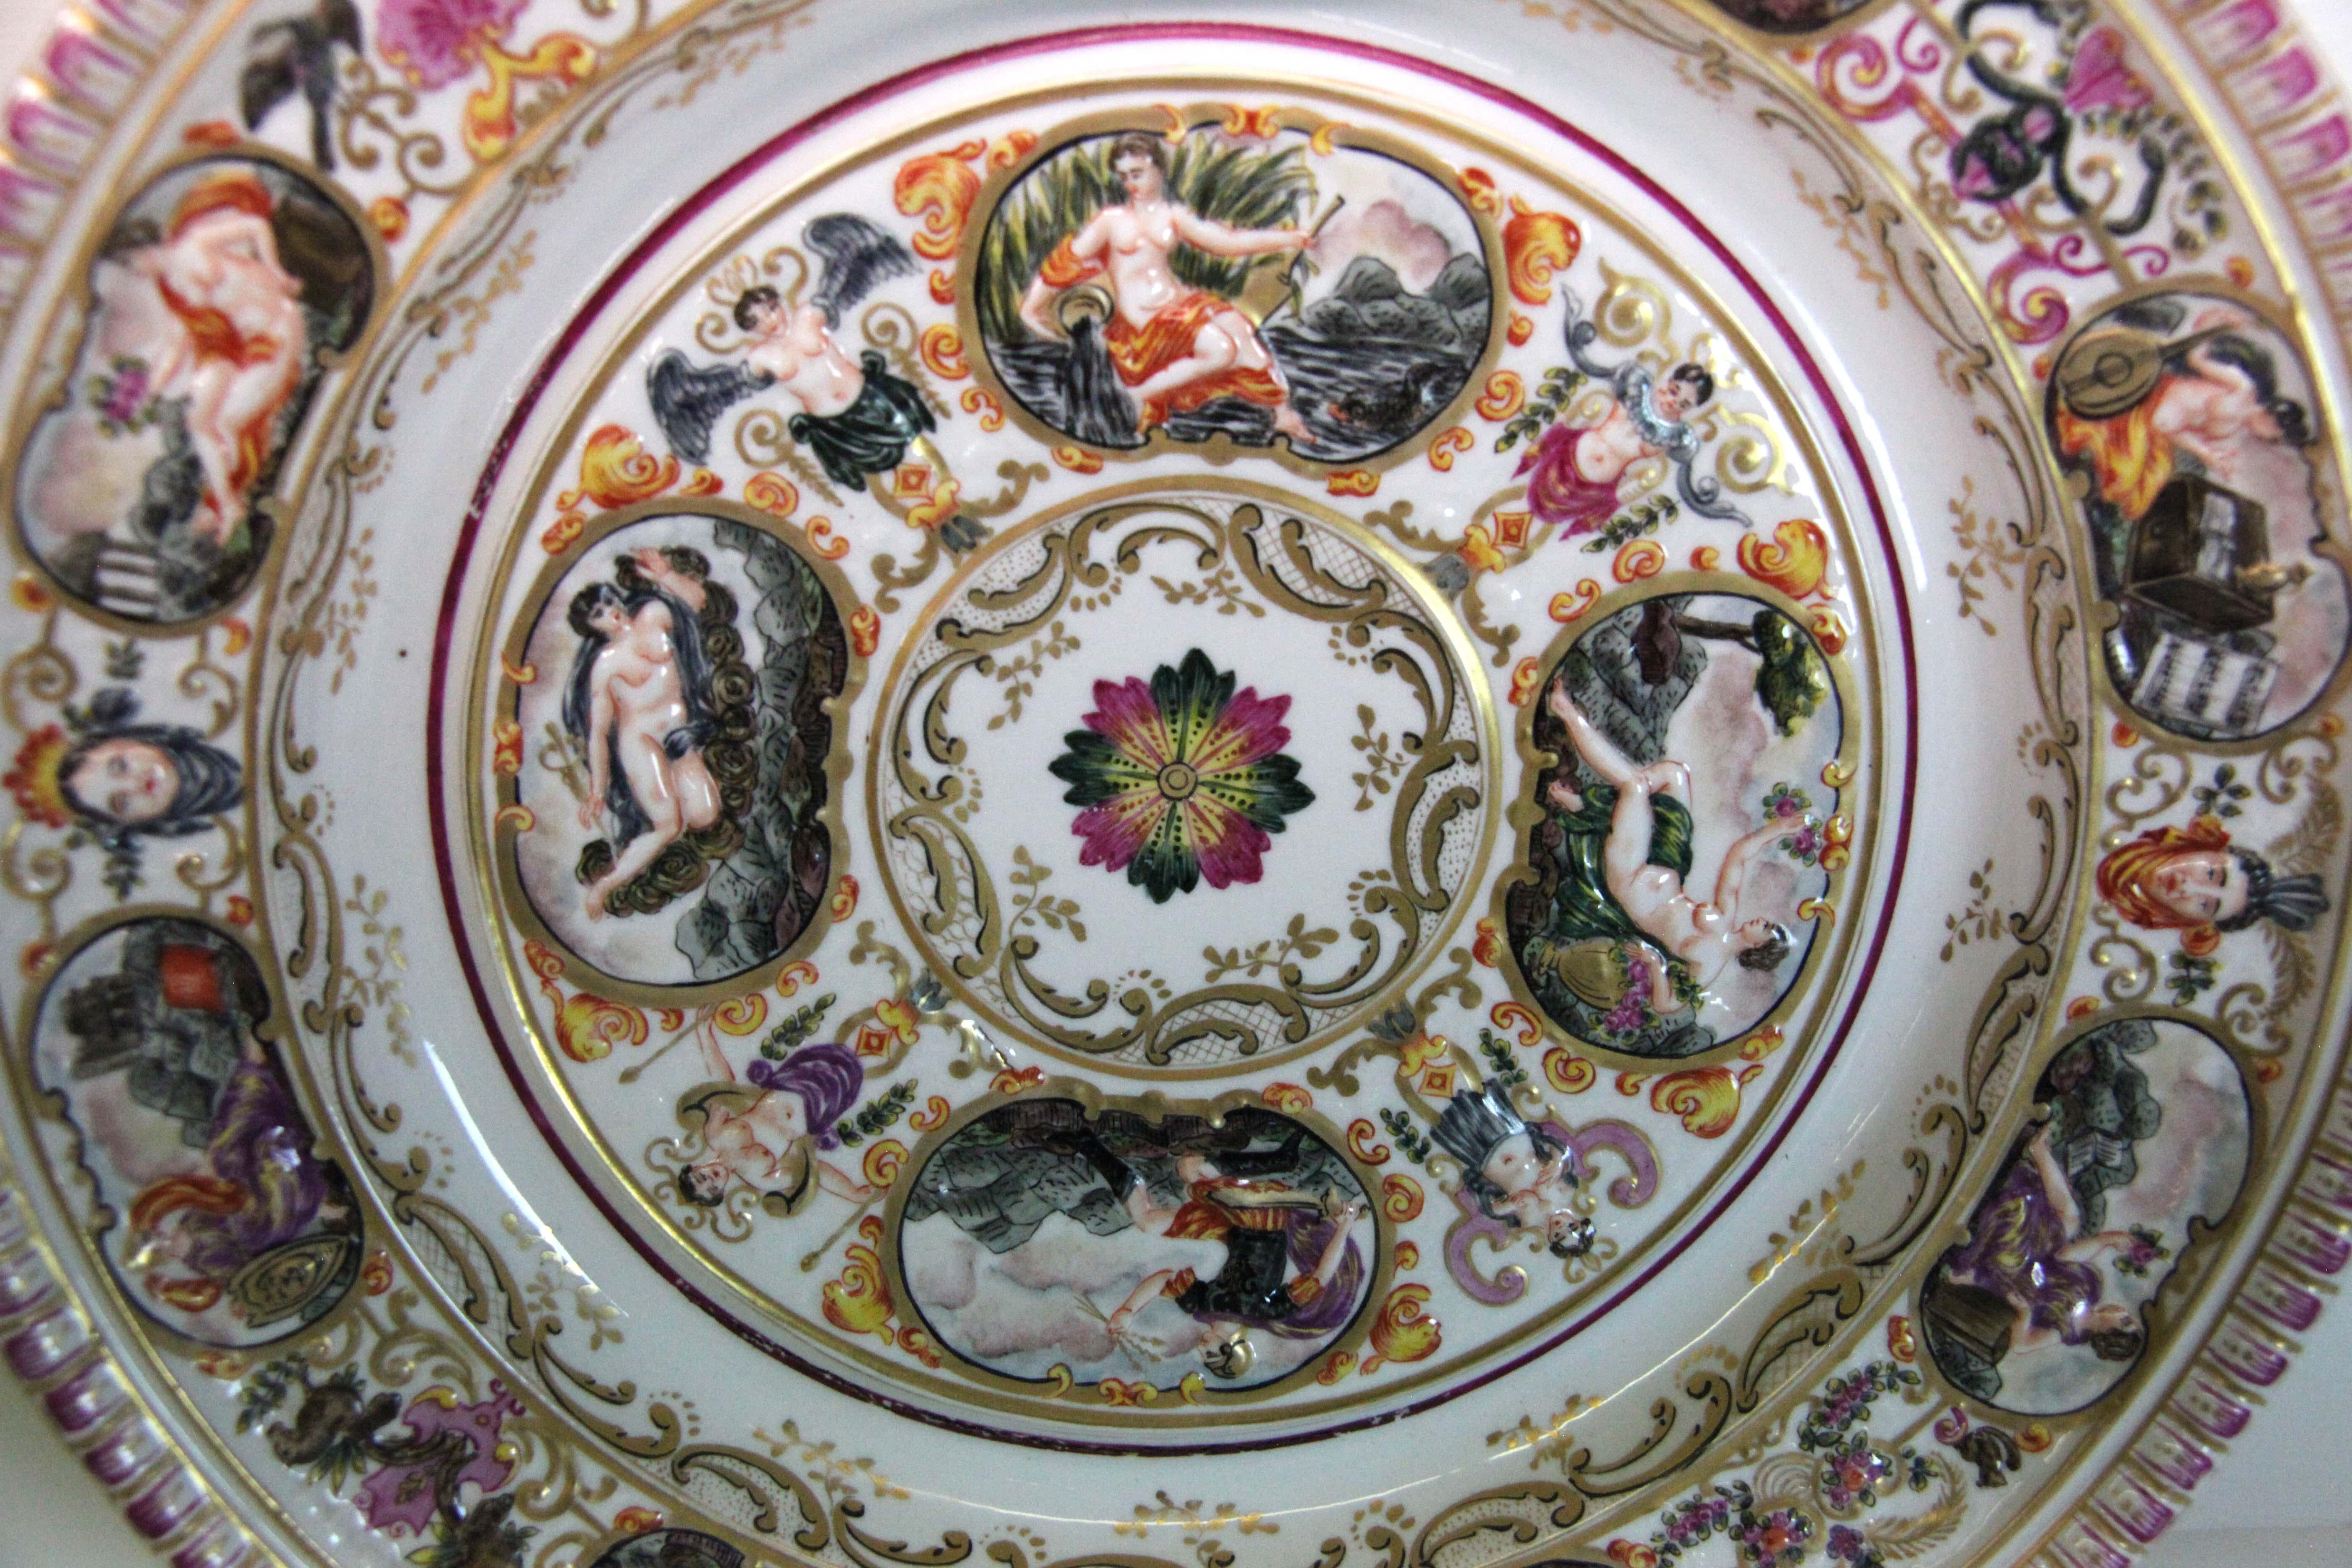 Capodimonte Porcelain Charger, with neoclassical scenes and figures in relief